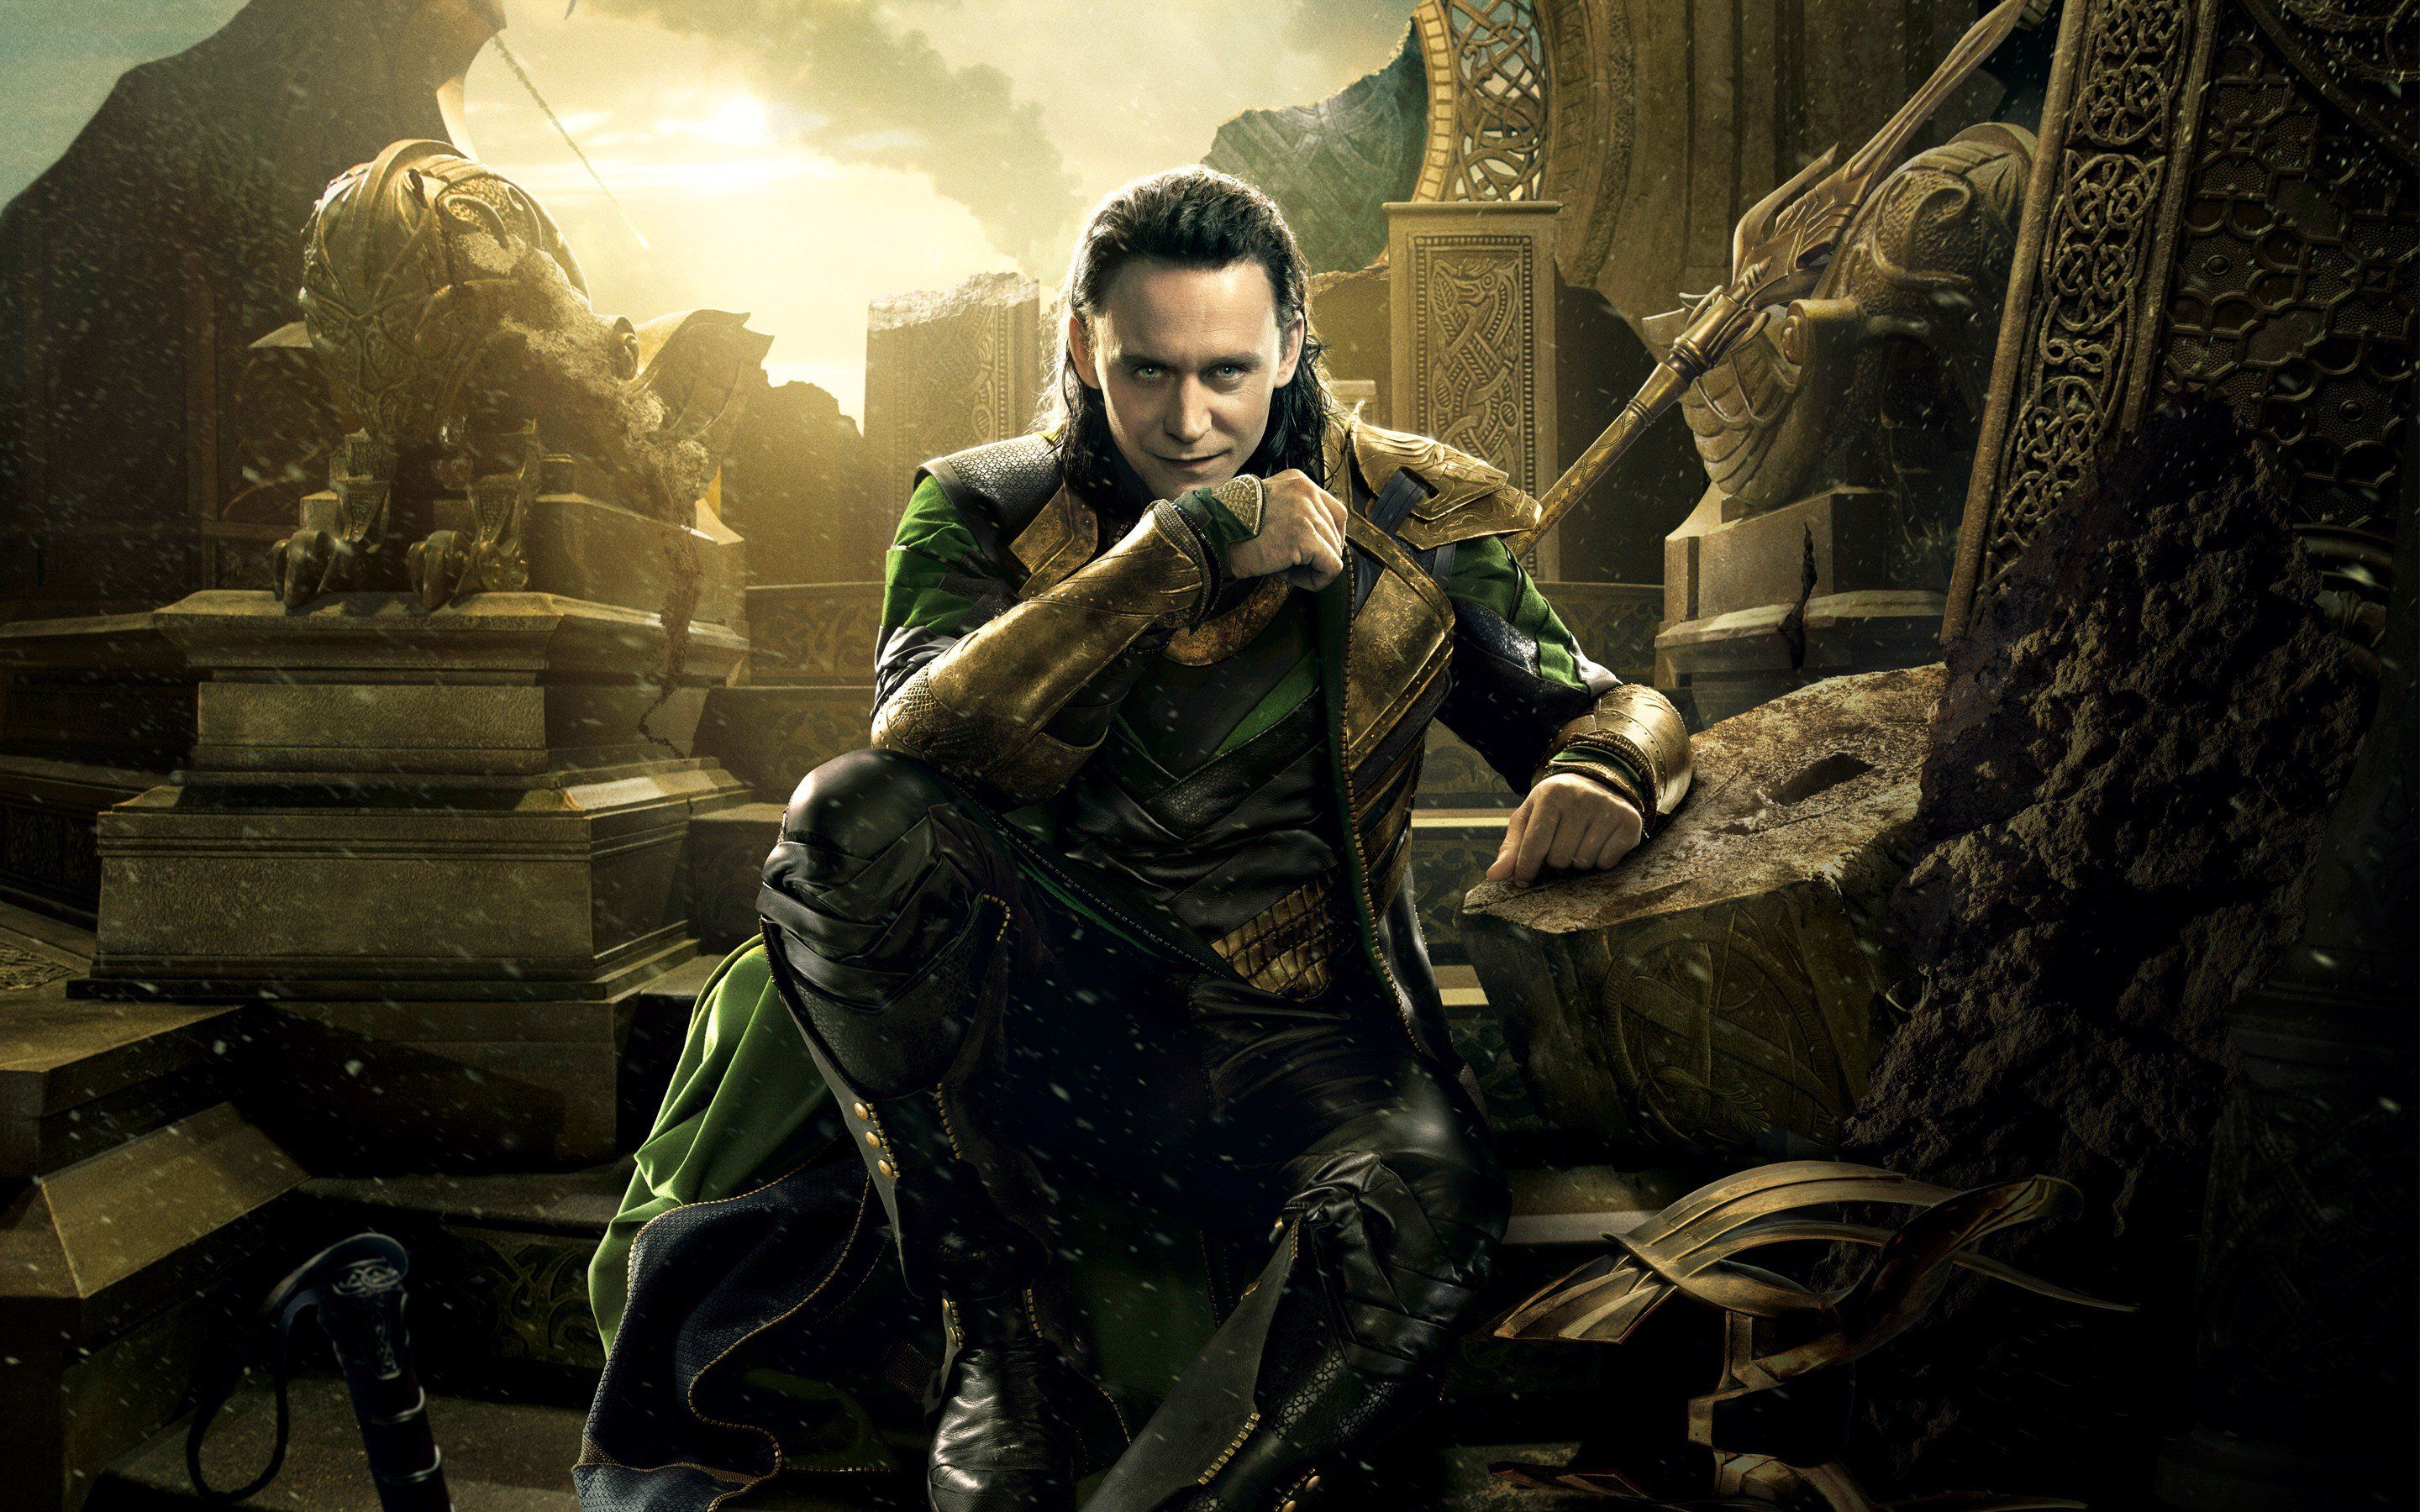 Loki TV Show is a “New Departure” According to Tom Hiddleston